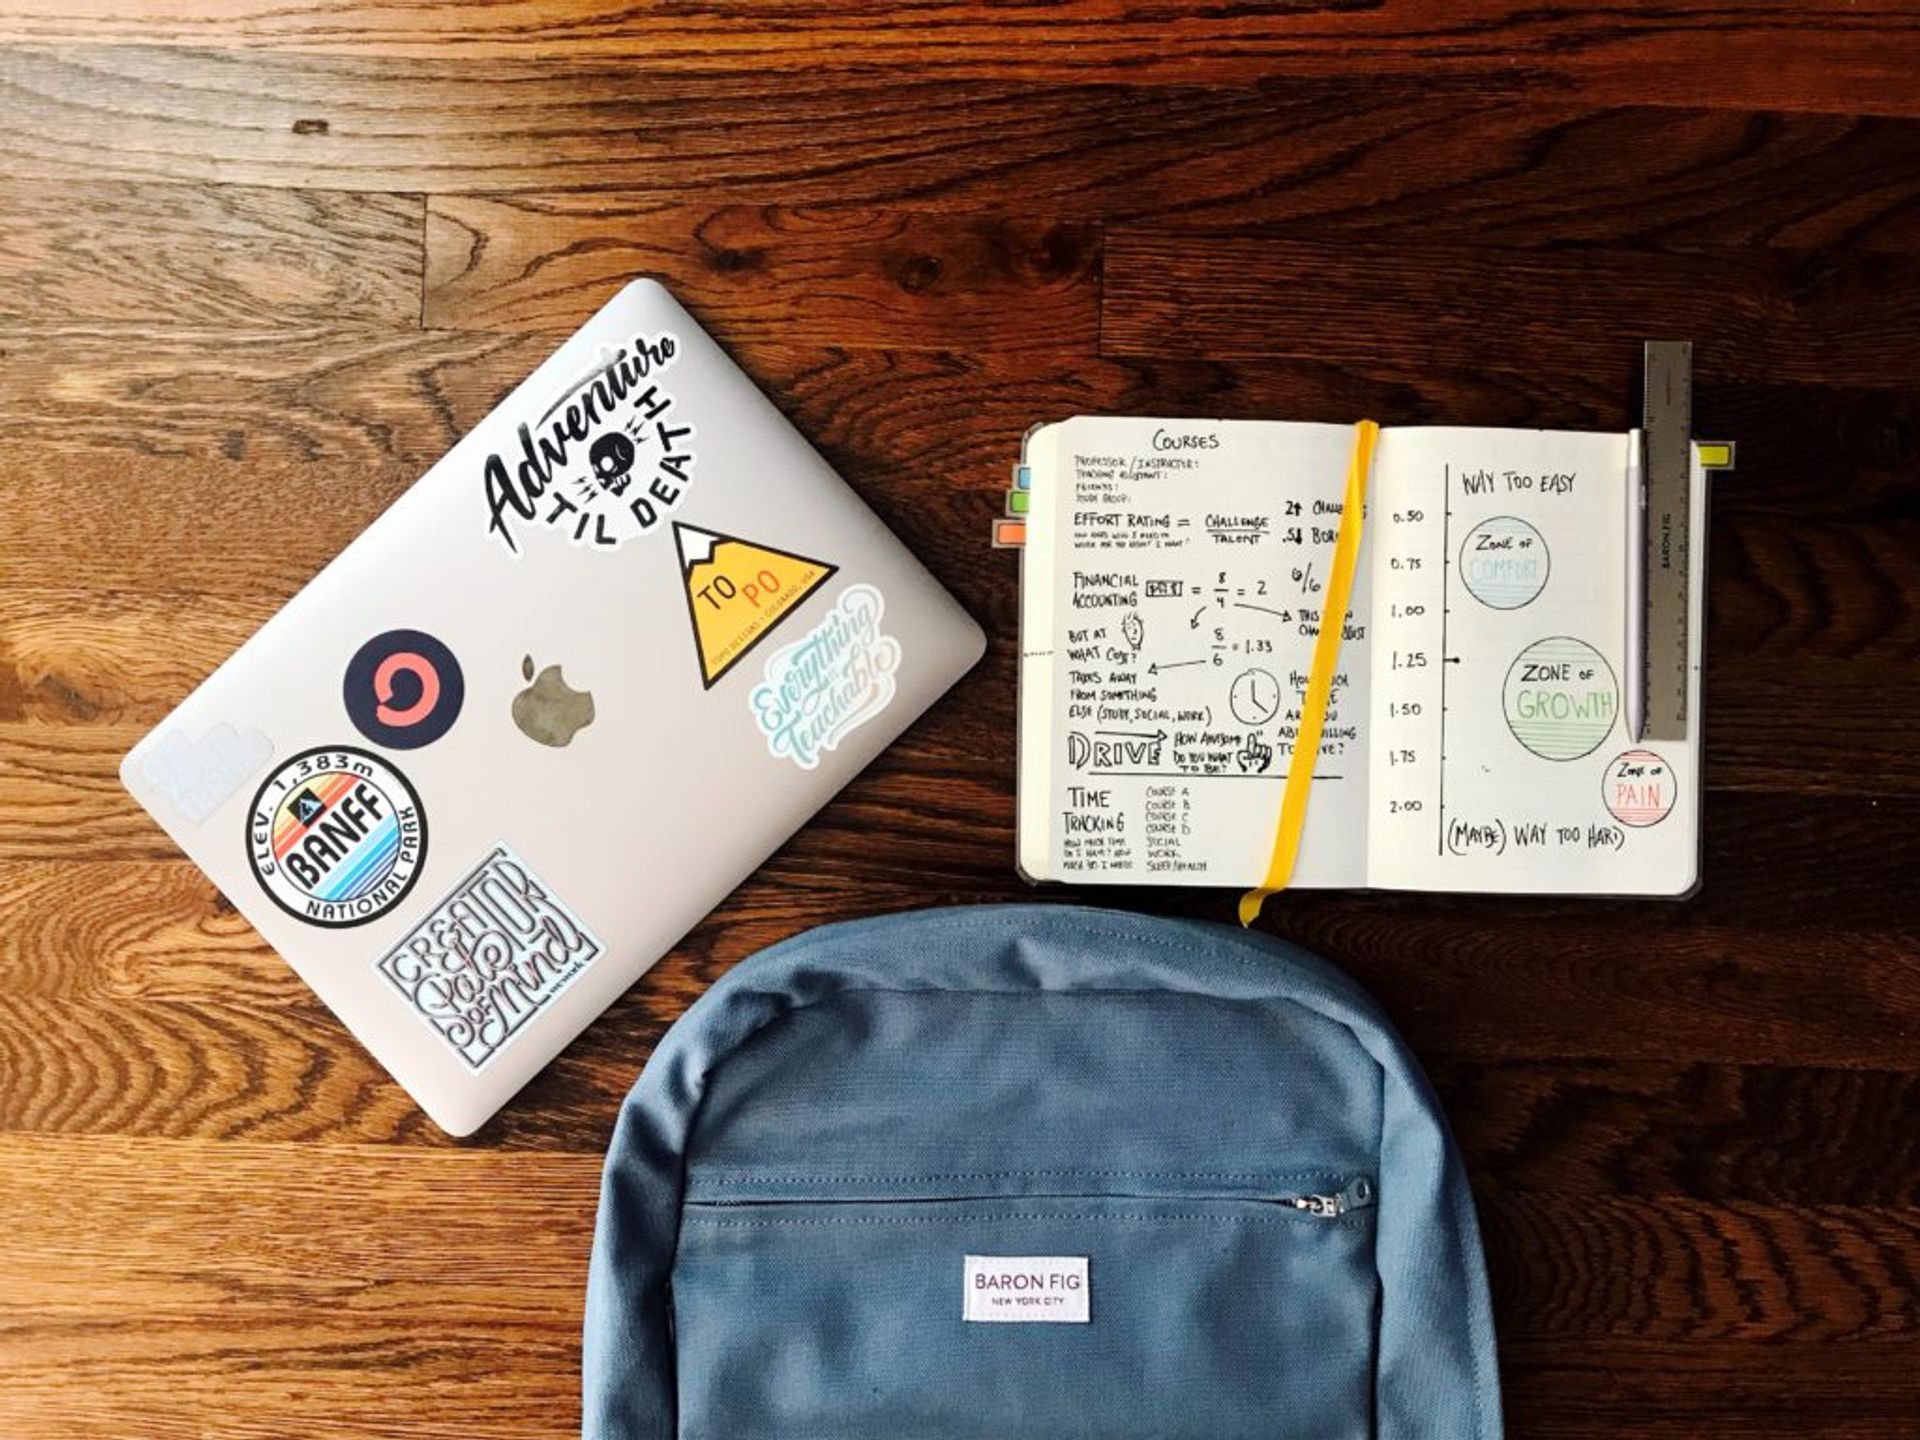 Laptop, notebook and bag.